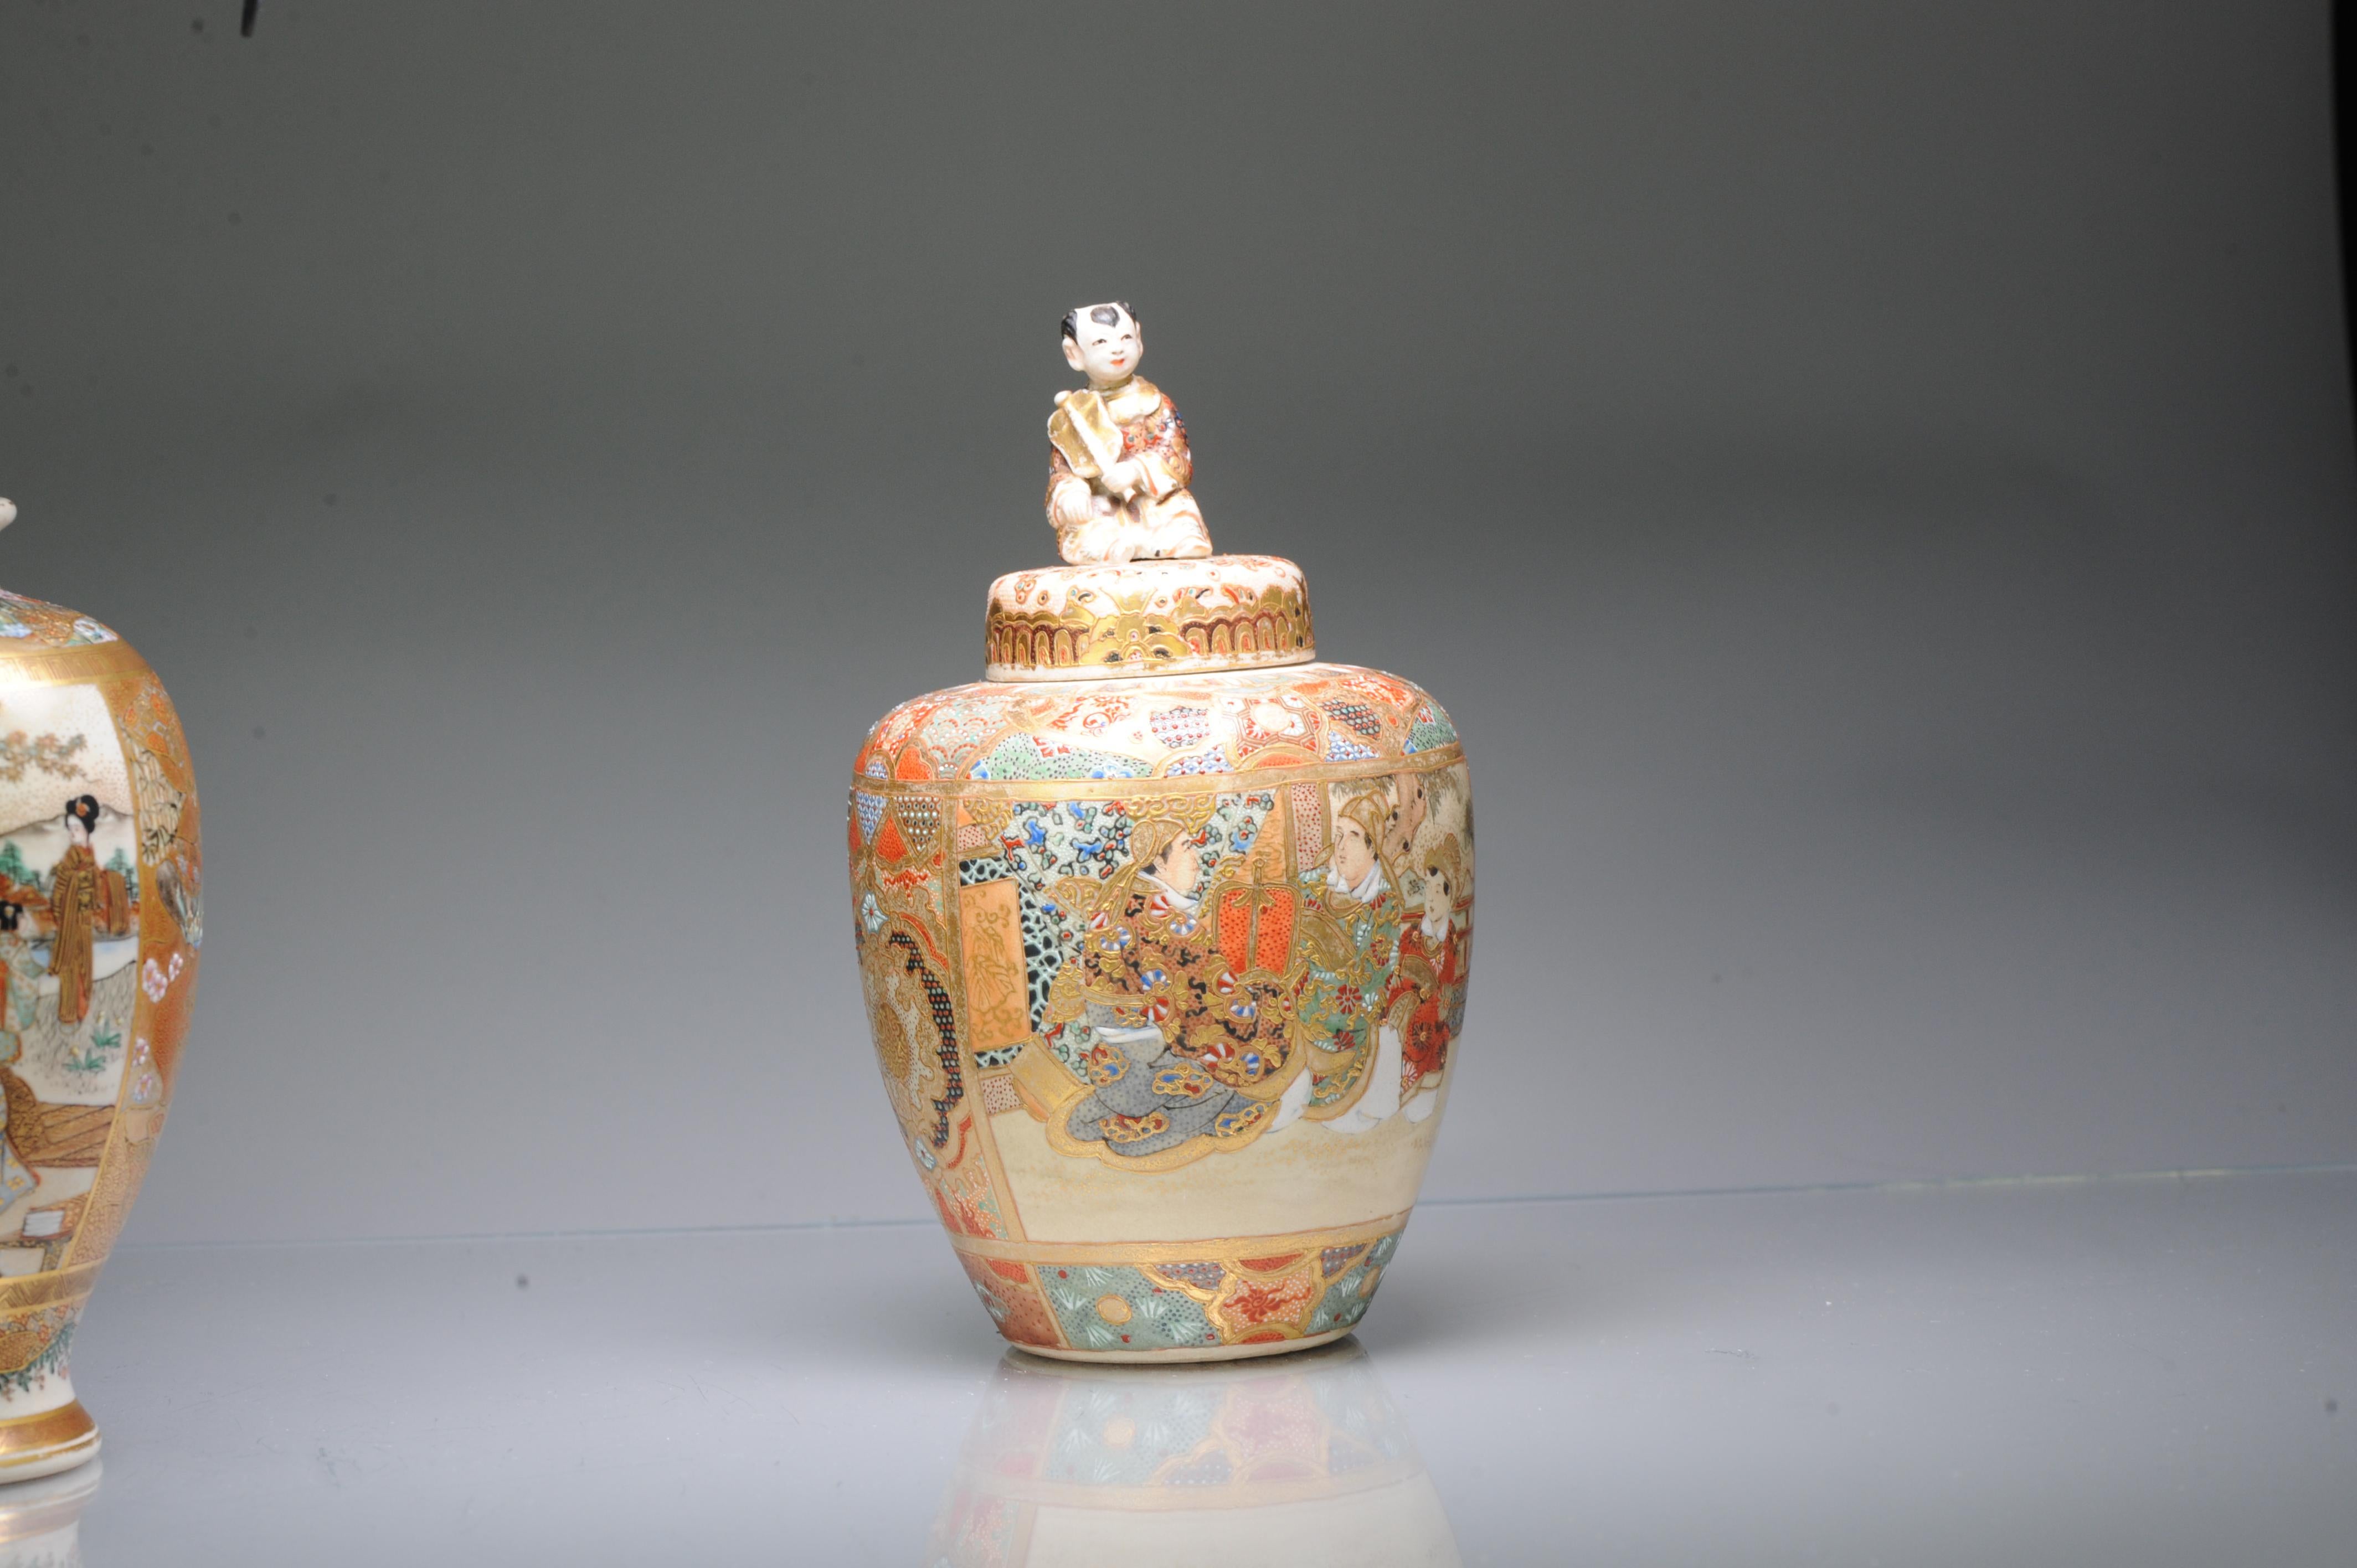 Description

Japanese Satsuma vase with cover, Meiji period
The first of ovoid form, the domed cover surmounted by a seated boy, decorated with scenes of noble figures in palace interiors.

Unmarked

Condition
Overall Condition Lid restored,